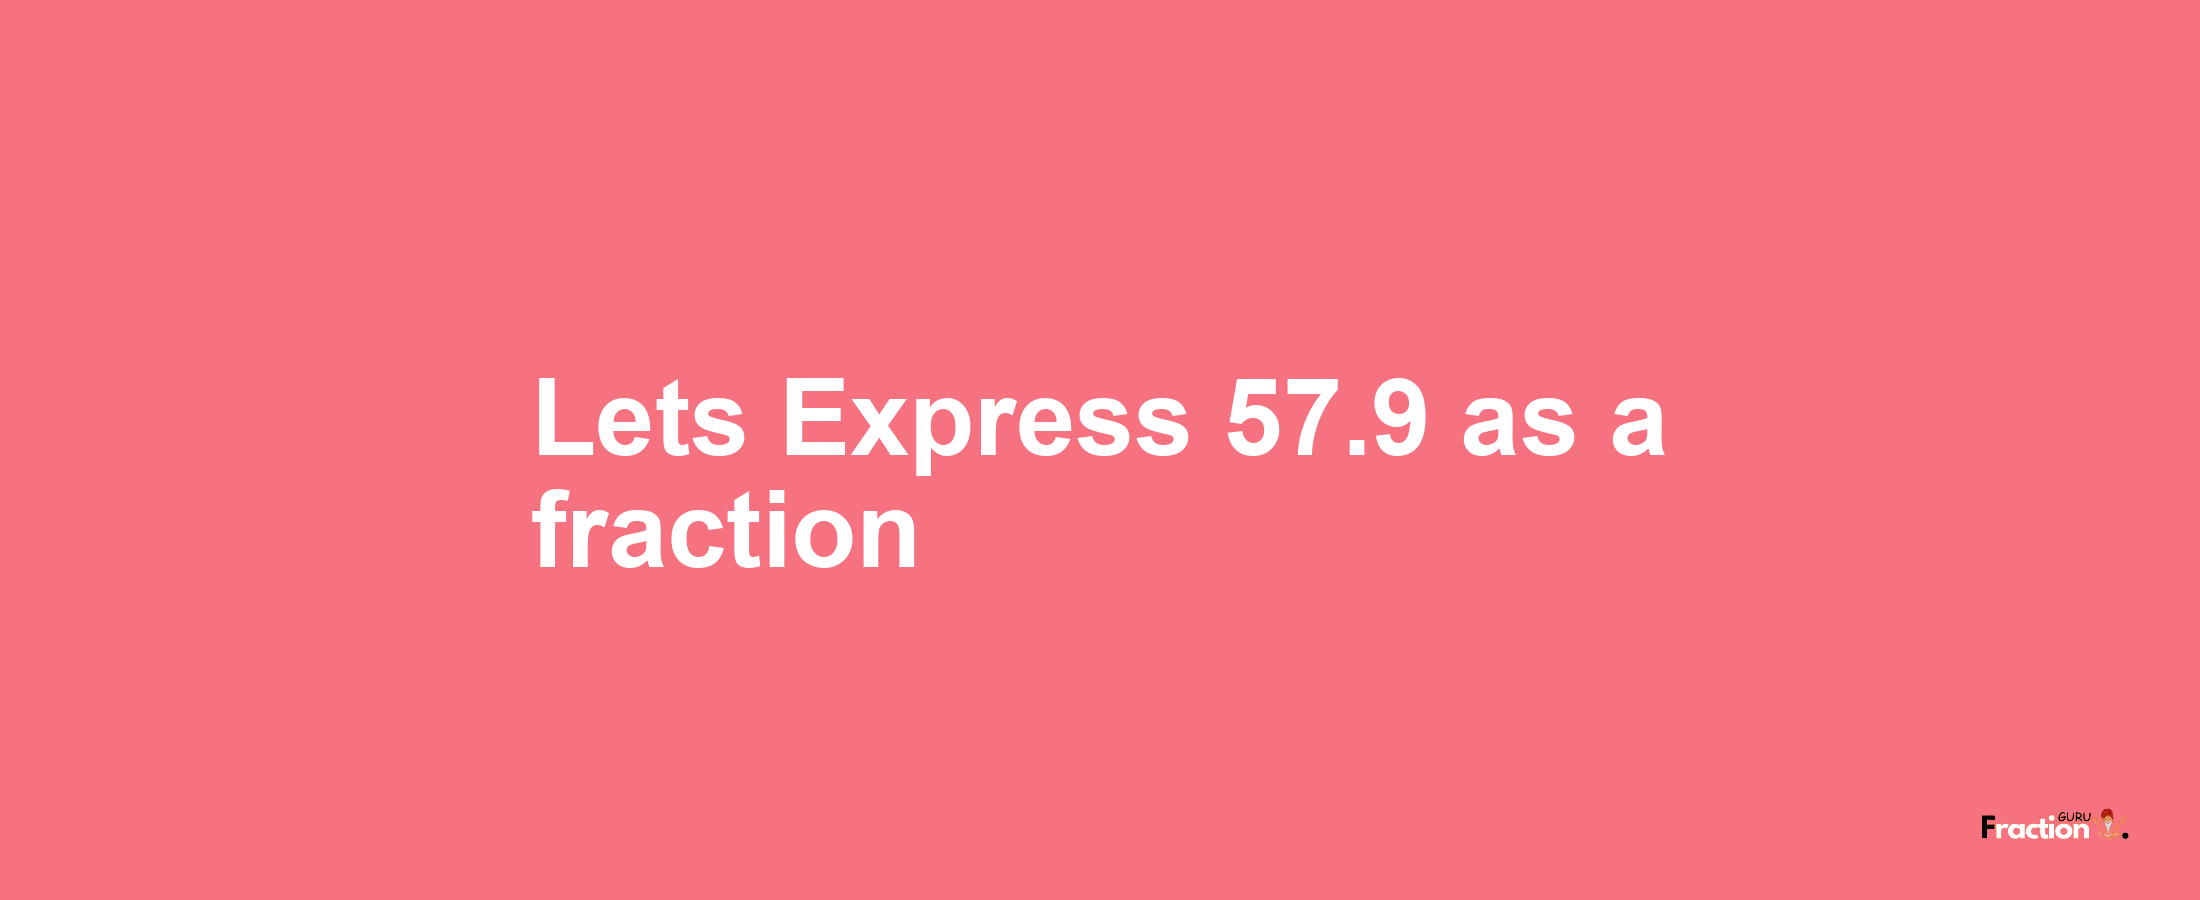 Lets Express 57.9 as afraction